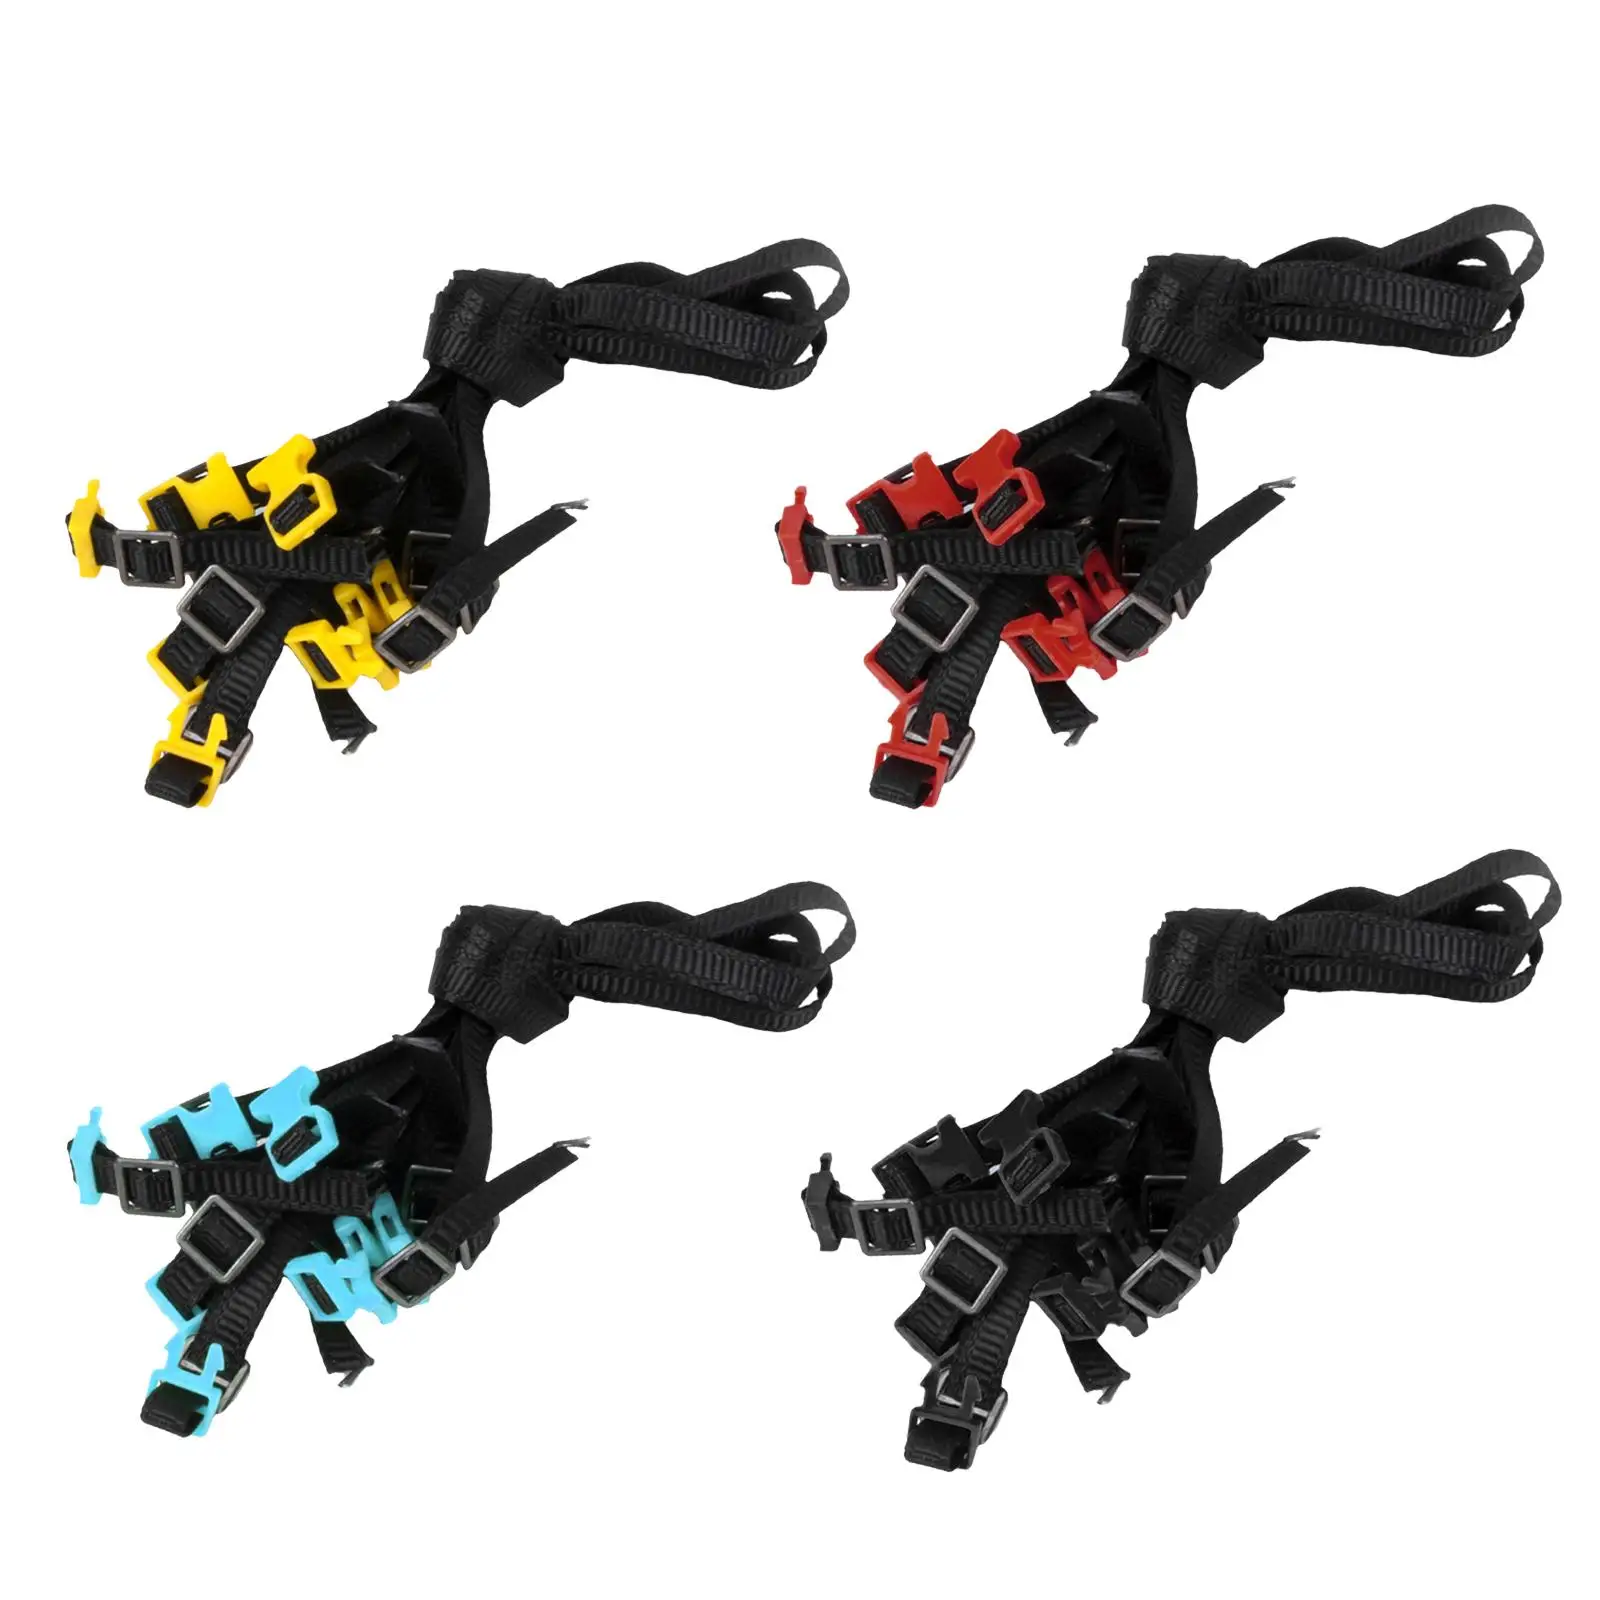 5x 1:10 Scale RC Car Roof Luggage Rack Rope RC Luggage Cord Rope for SCX10 D90 DIY Modified